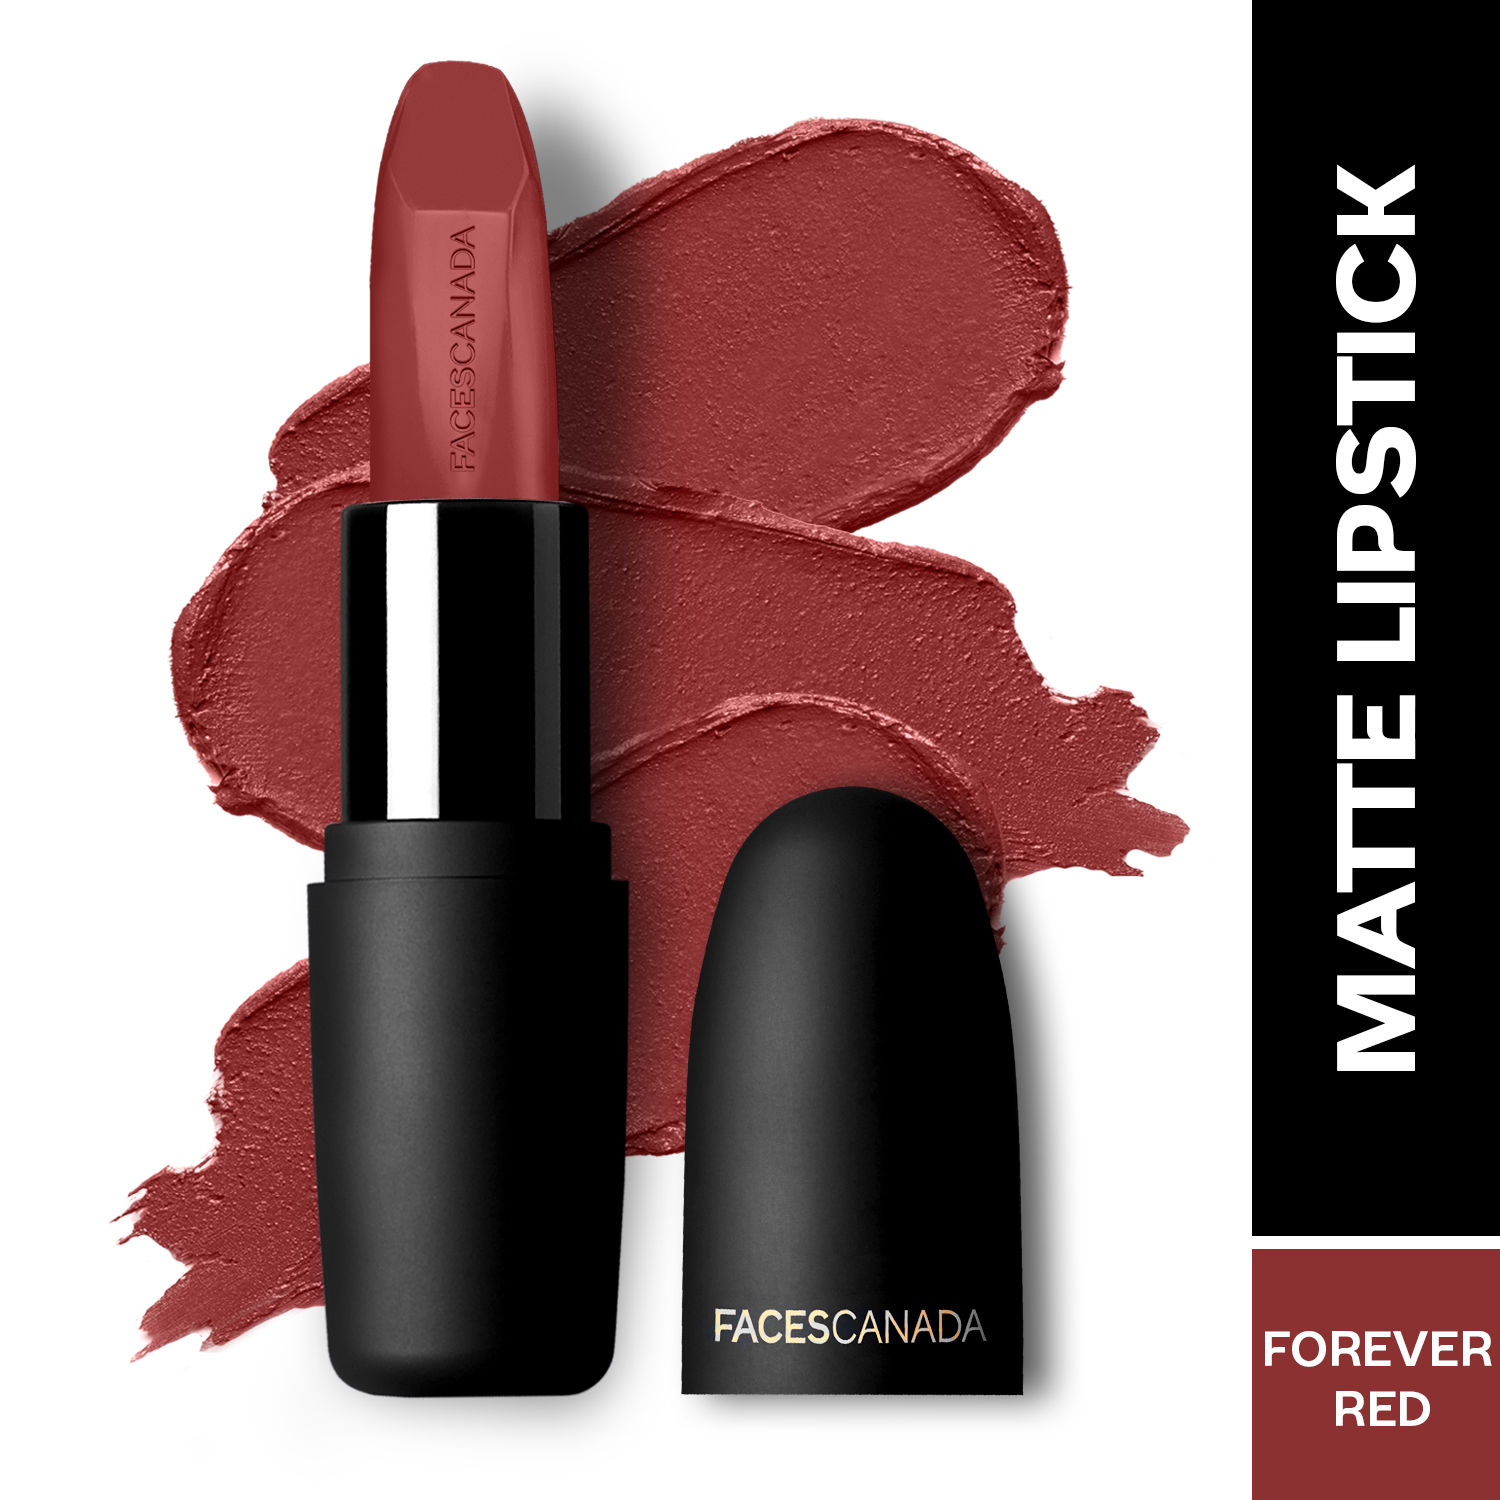 Buy FACES CANADA Weightless Matte Lipstick - Forever Red 03, 4.5g | High Pigment | Smooth One Stroke Glide | Moisturizes & Hydrates Lips | Vitamin E, Jojoba & Almond Oil - Purplle